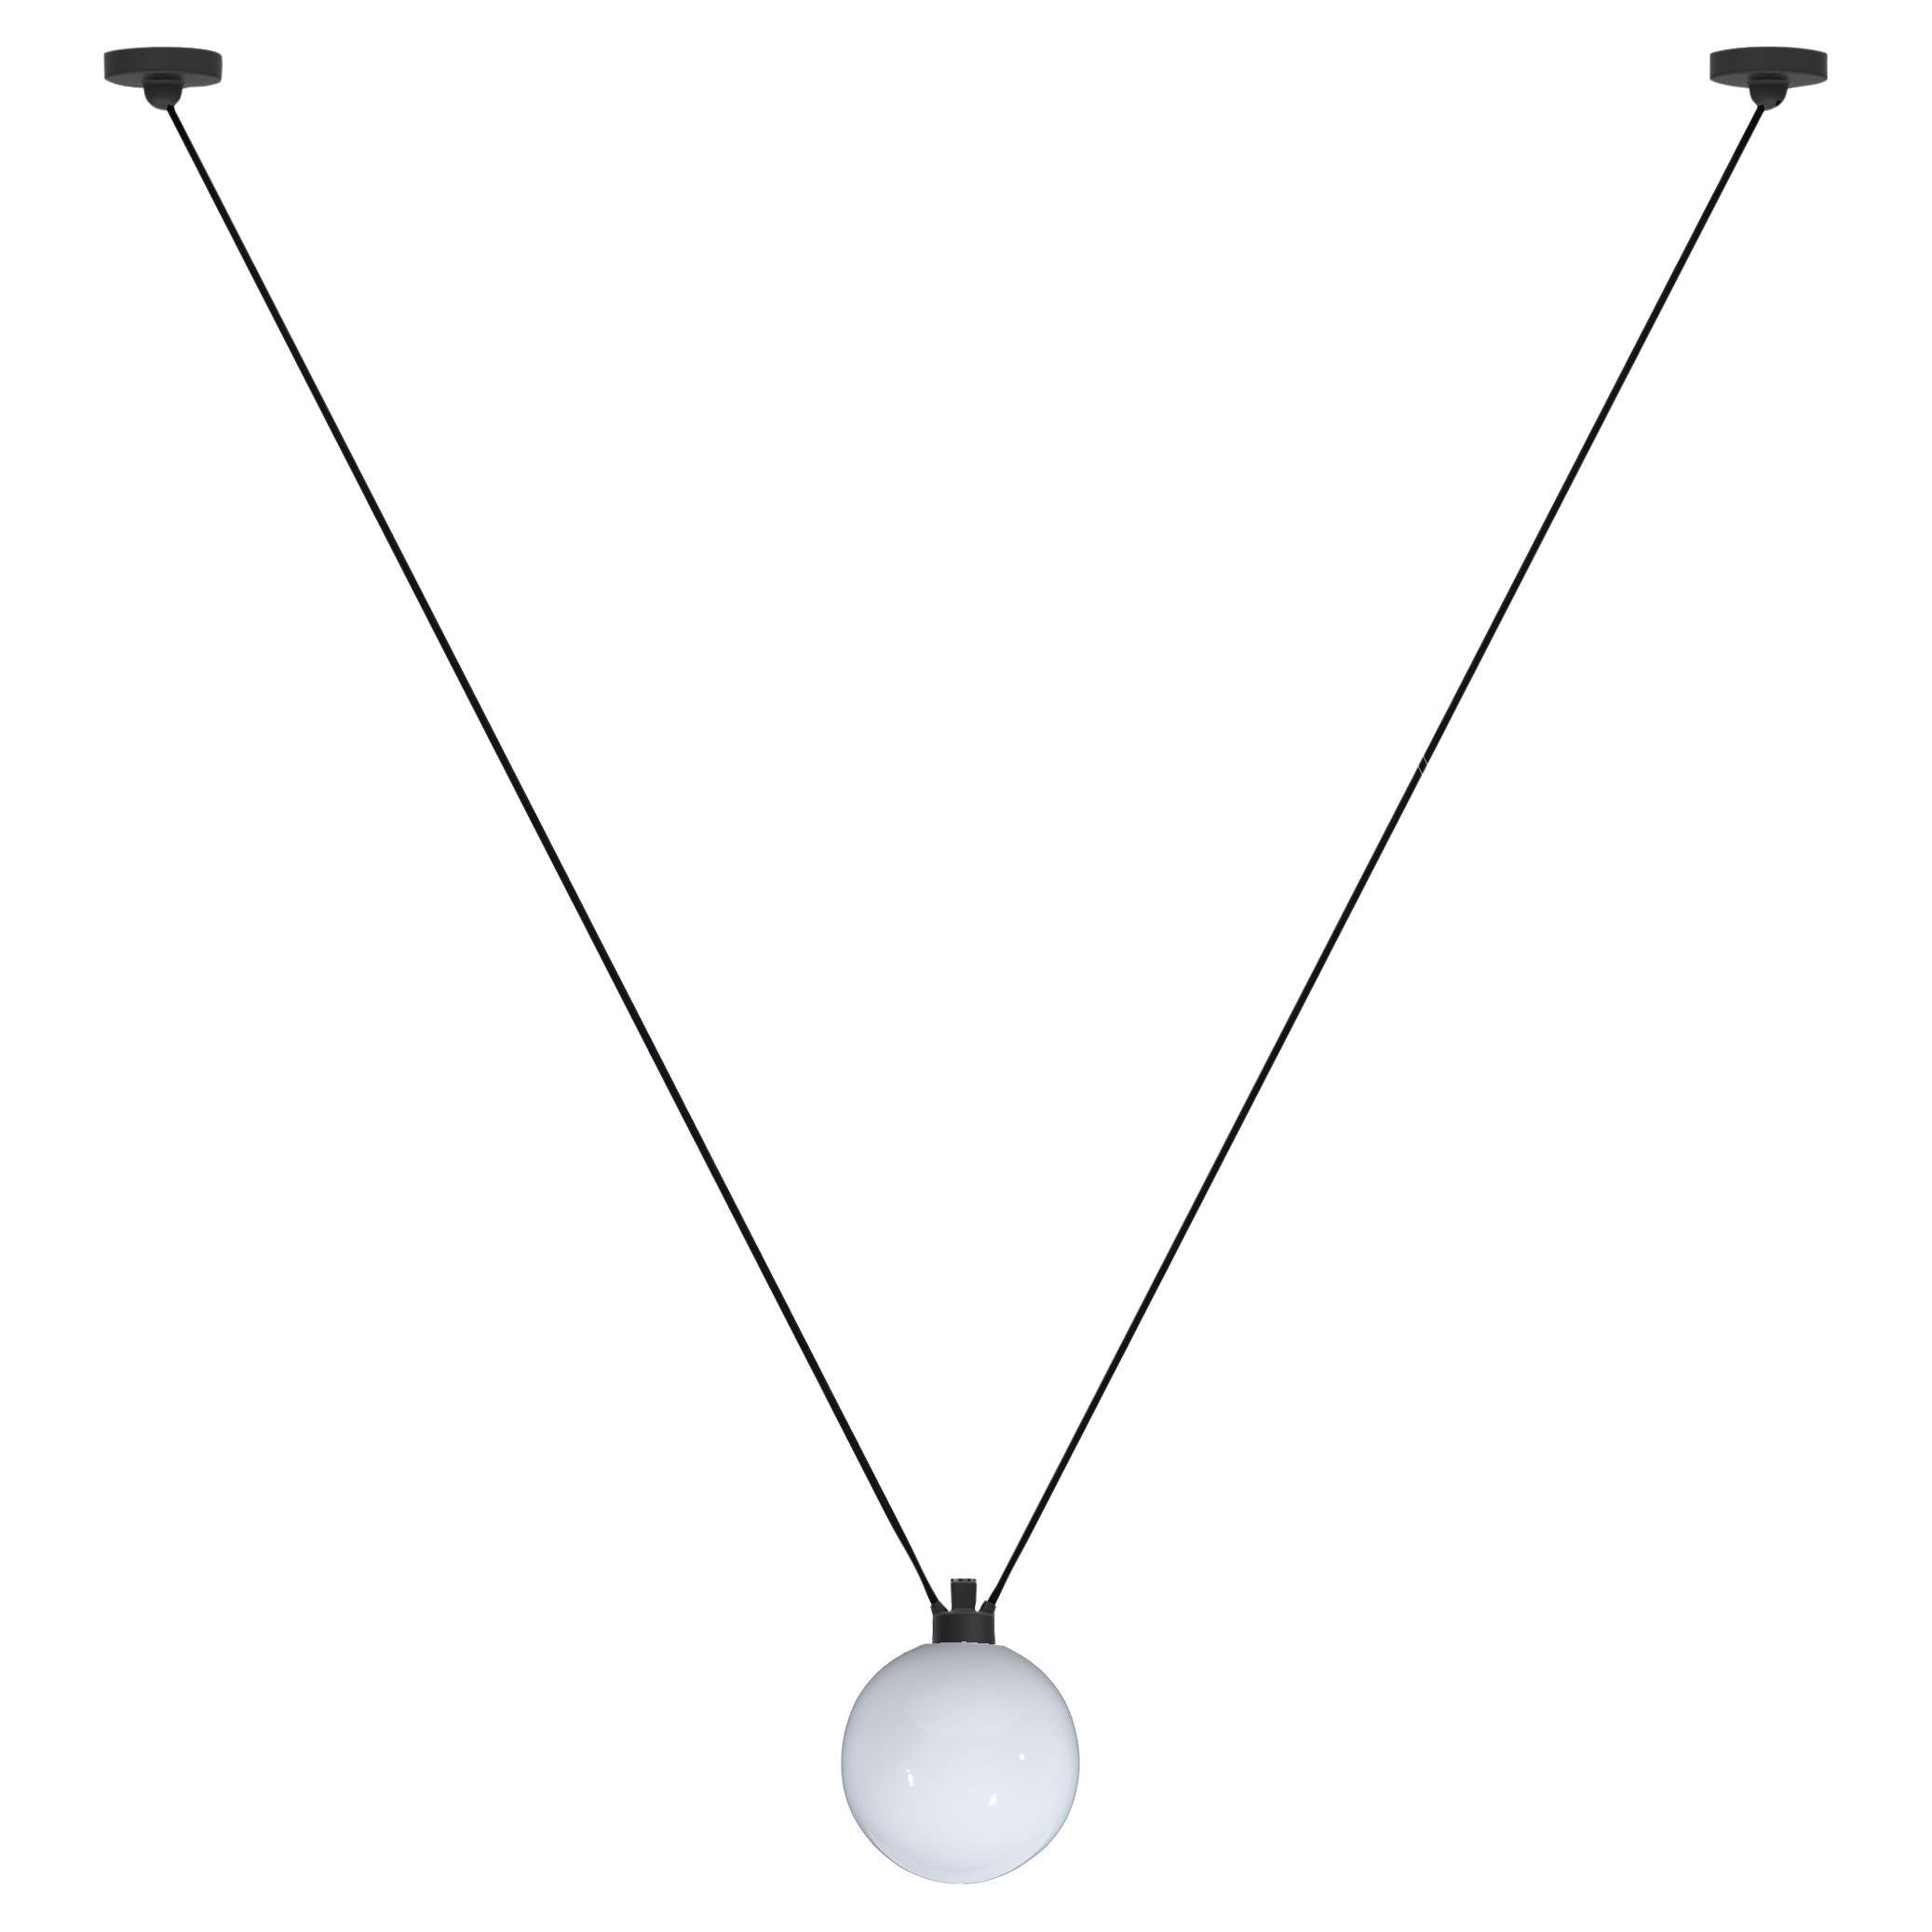 DCW Editions Les Acrobates N°323 Pendant Lamp in Black Arm and Small Glassball